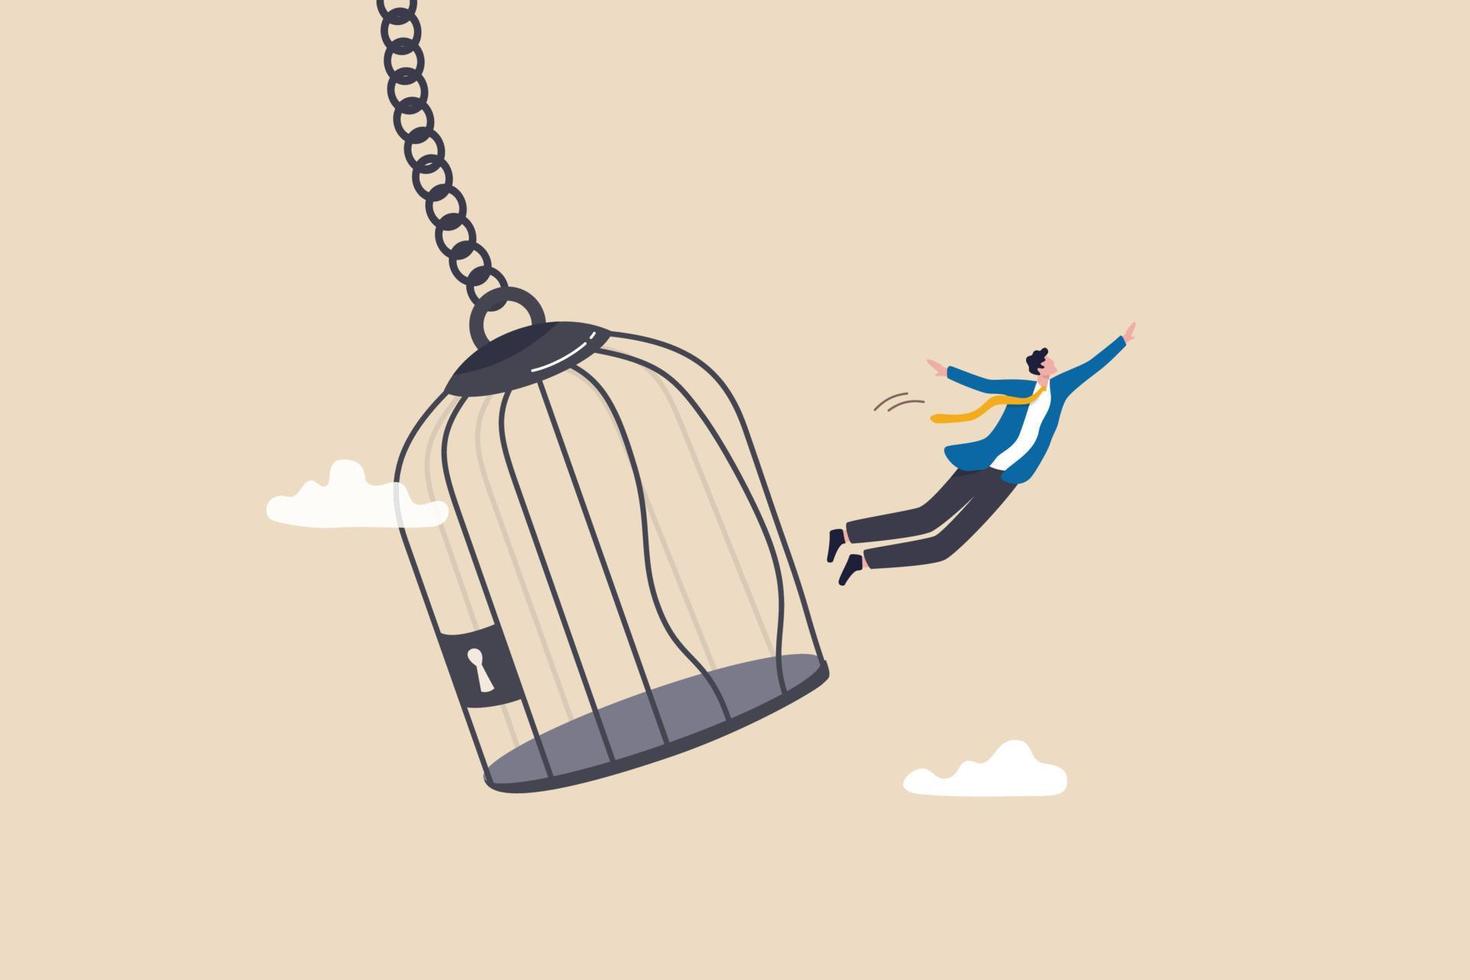 Courage to escape for freedom, get out of comfort zone to find new job, open mind or fly away for better life, hope and liberty concept, courage businessman escape from bird cage jump and fly away. vector